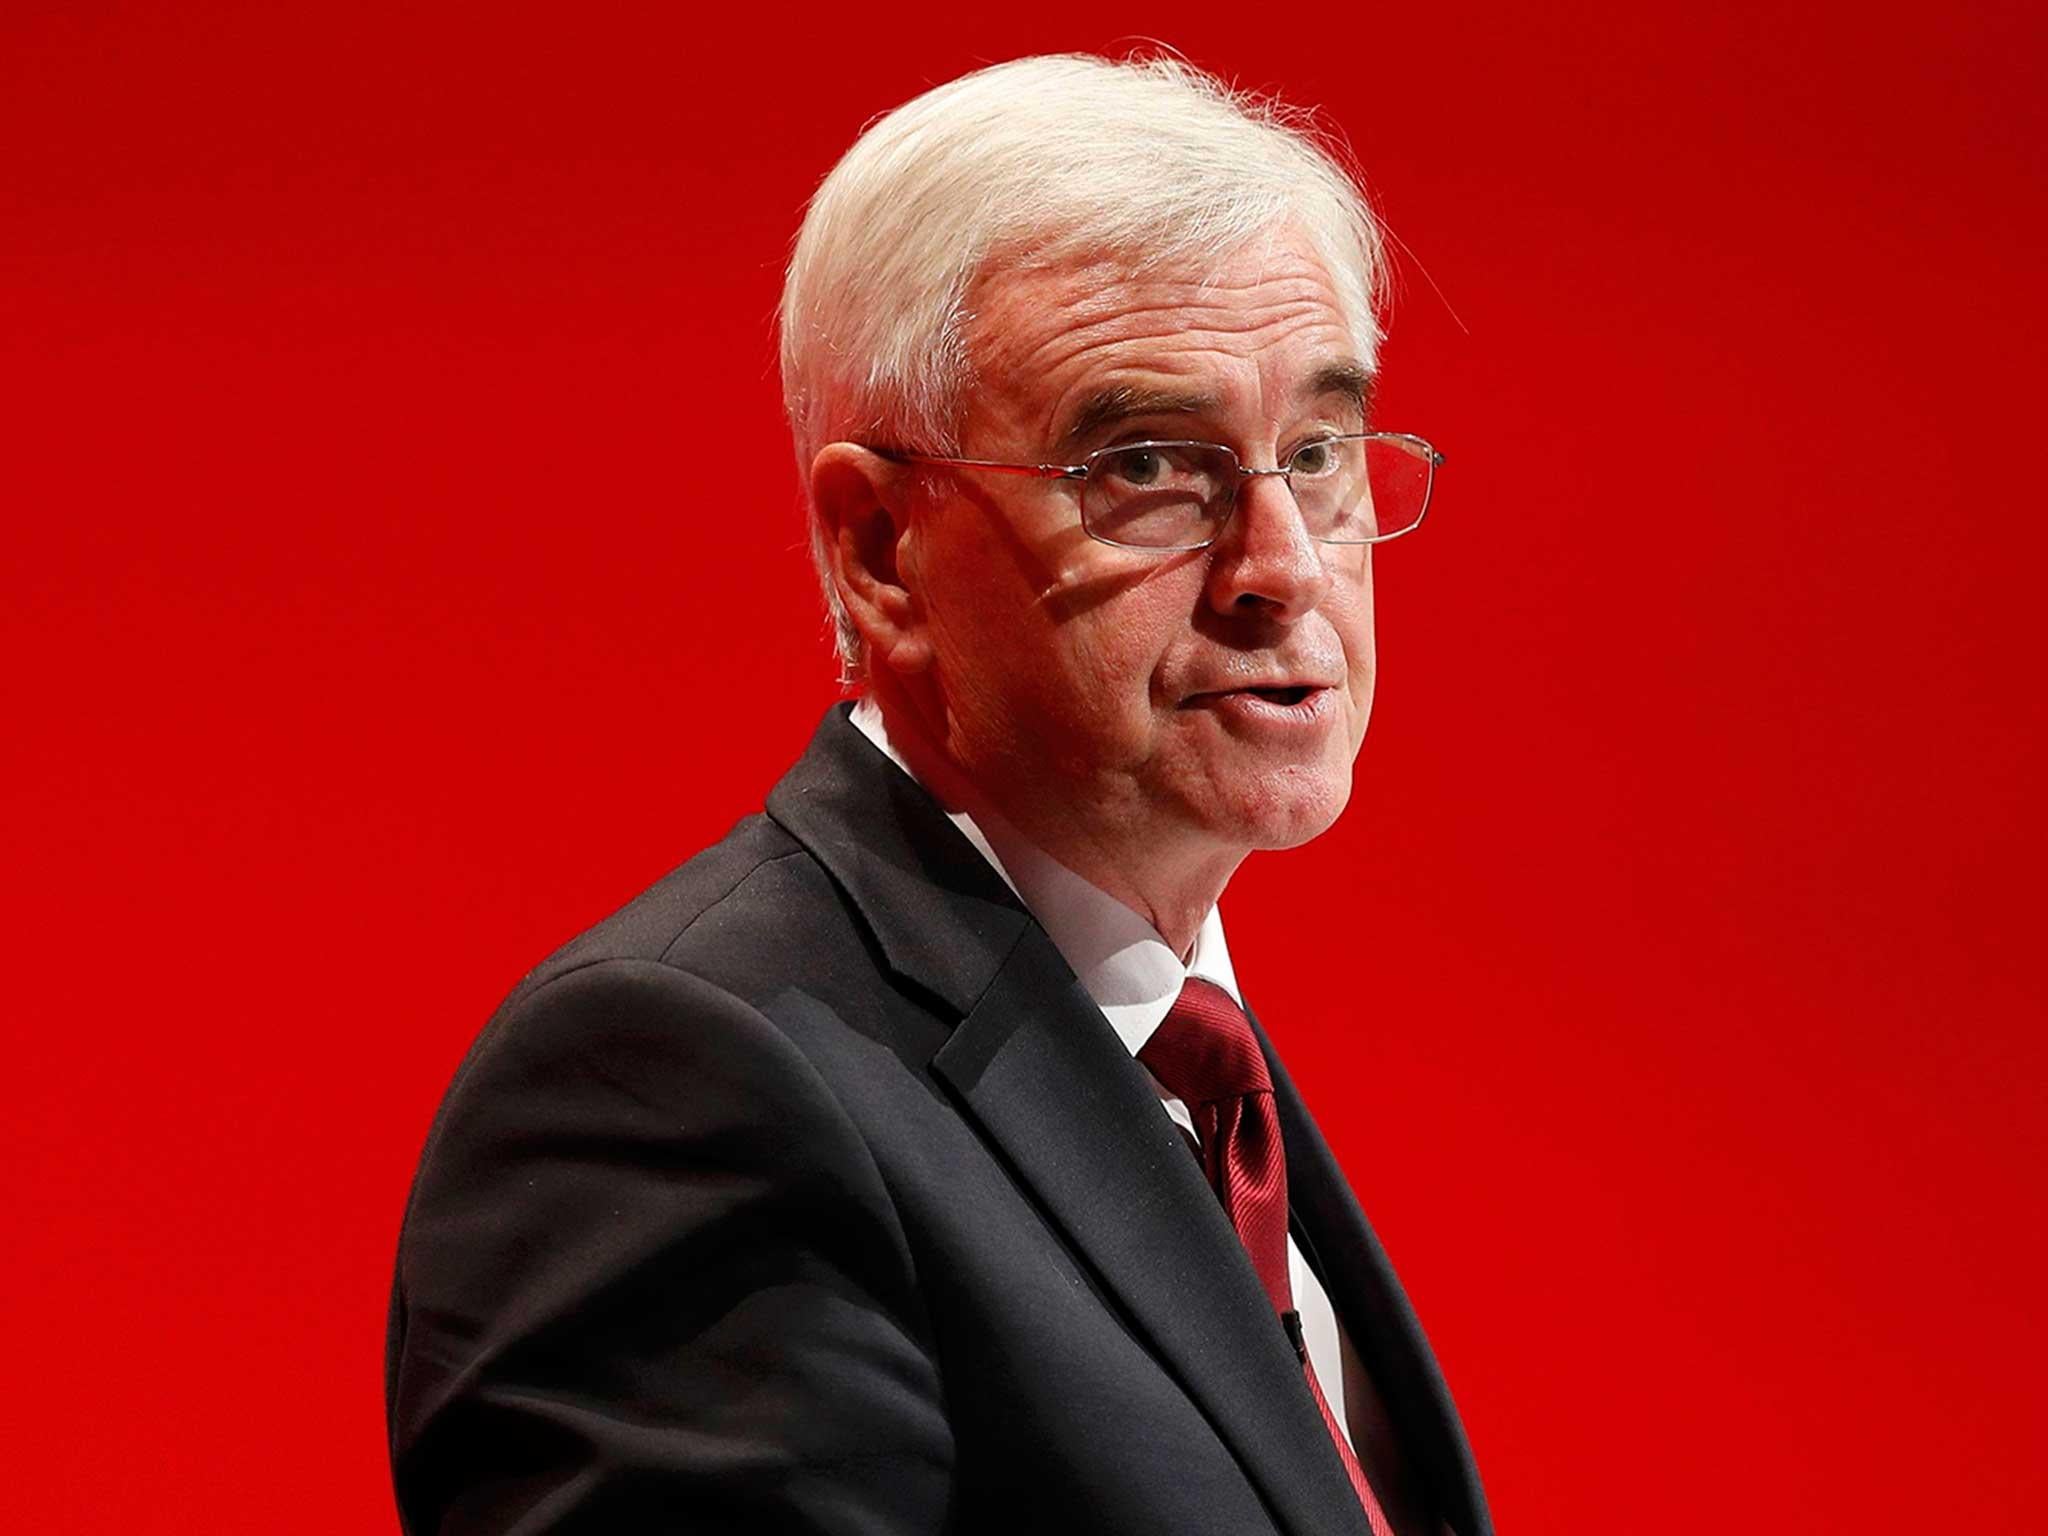 Britain's shadow Chancellor of the Exchequer, John McDonnell, delivers his keynote speech the annual Labour Party conference in Liverpool